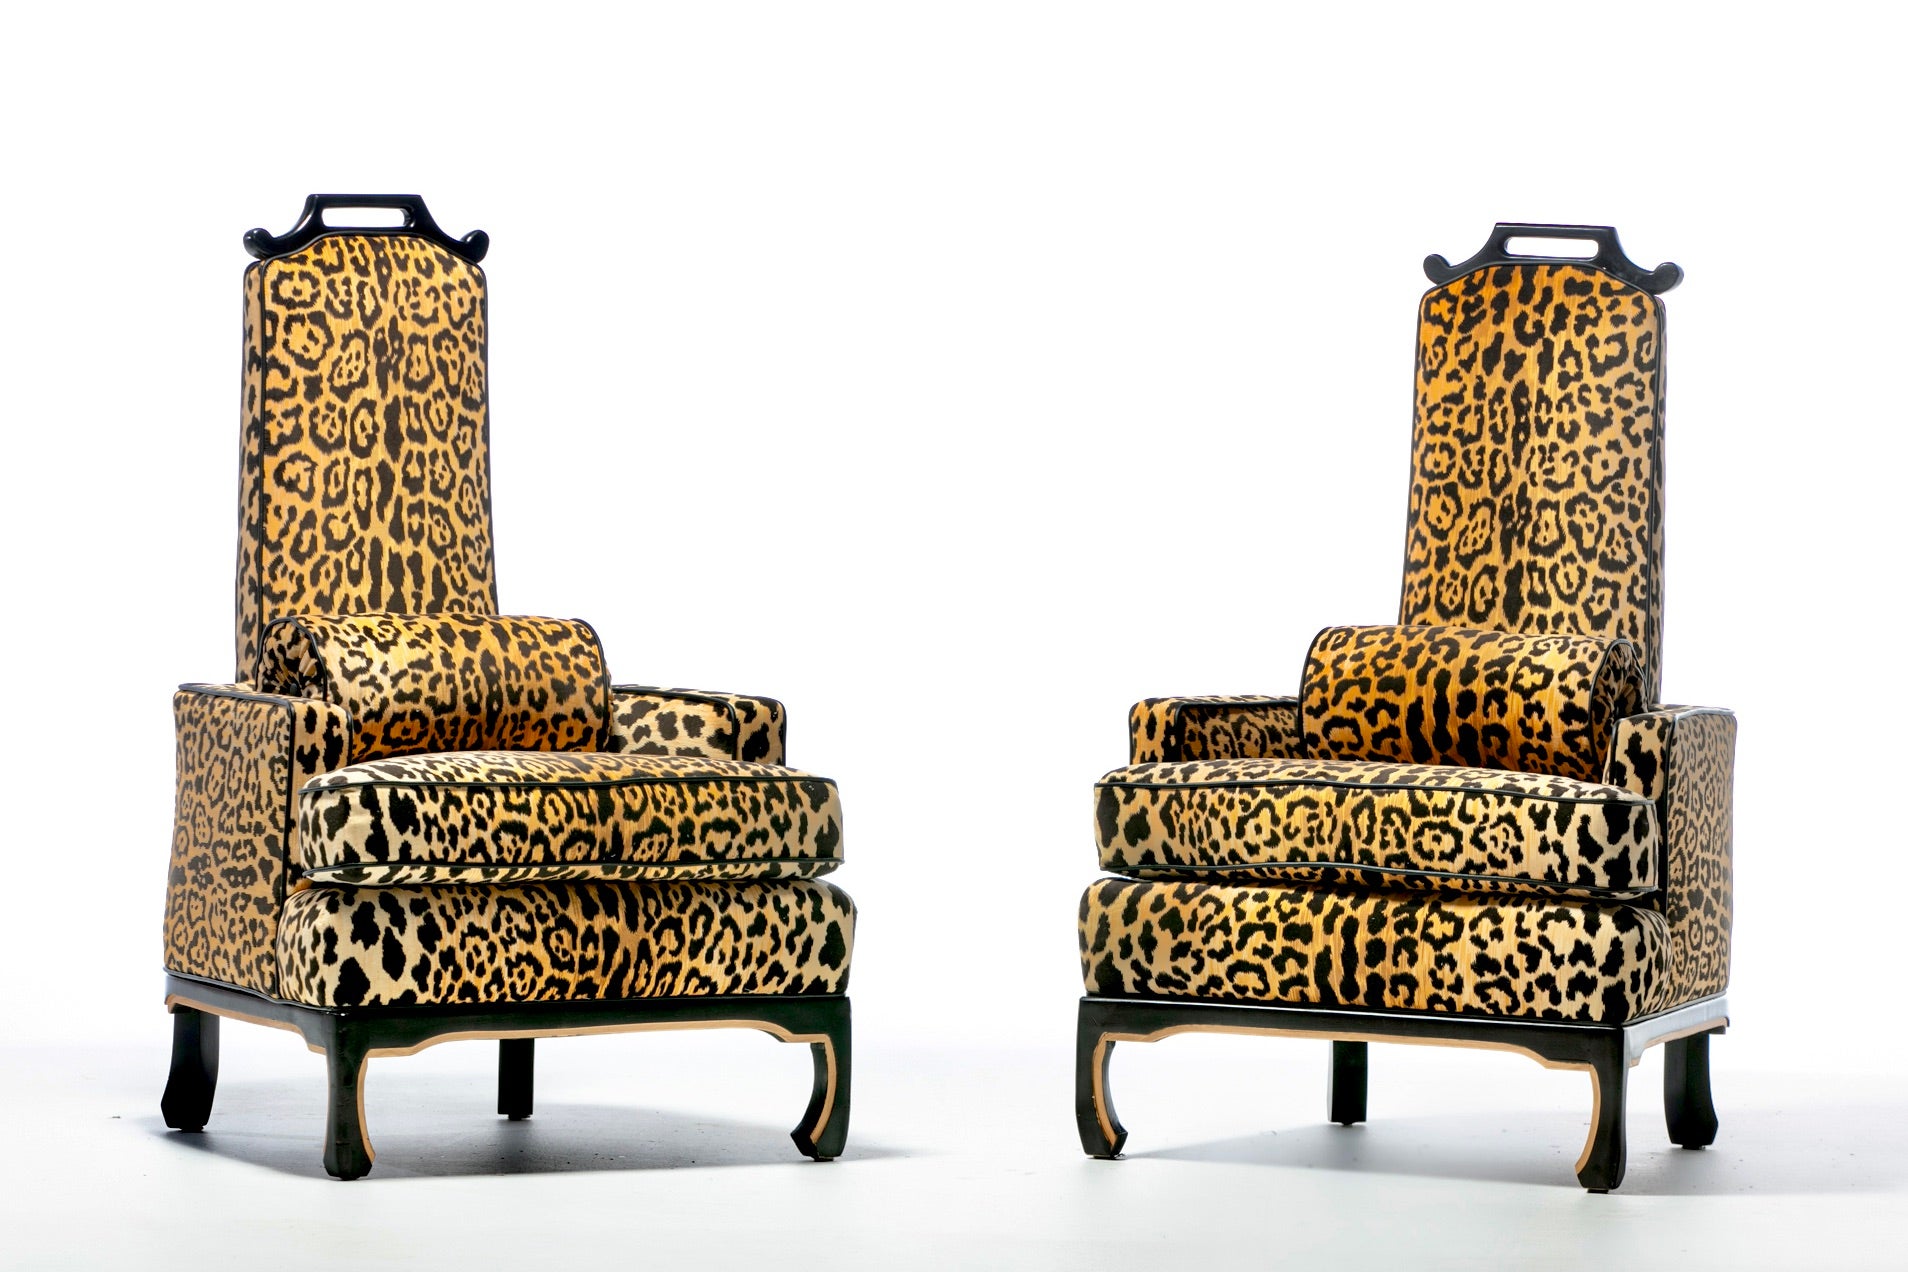 Pair of 1960s Hollywood Regency Chairs in Leopard Velvet & Black Leather Piping 4